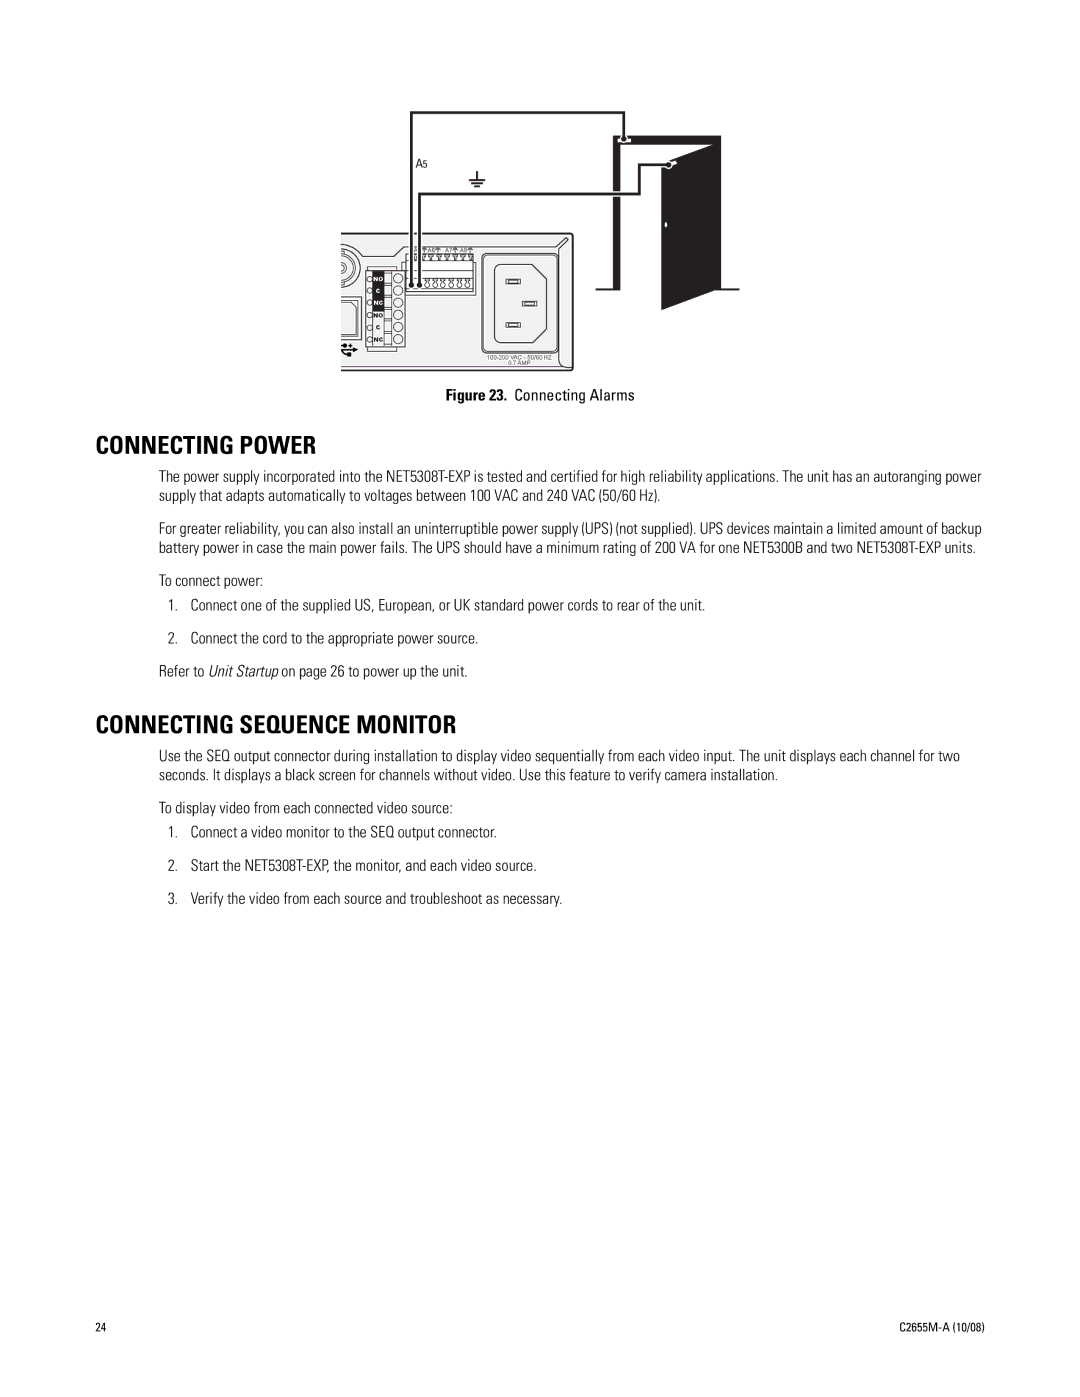 Pelco NET5308T-EXP manual Connecting Power, Connecting Sequence Monitor 